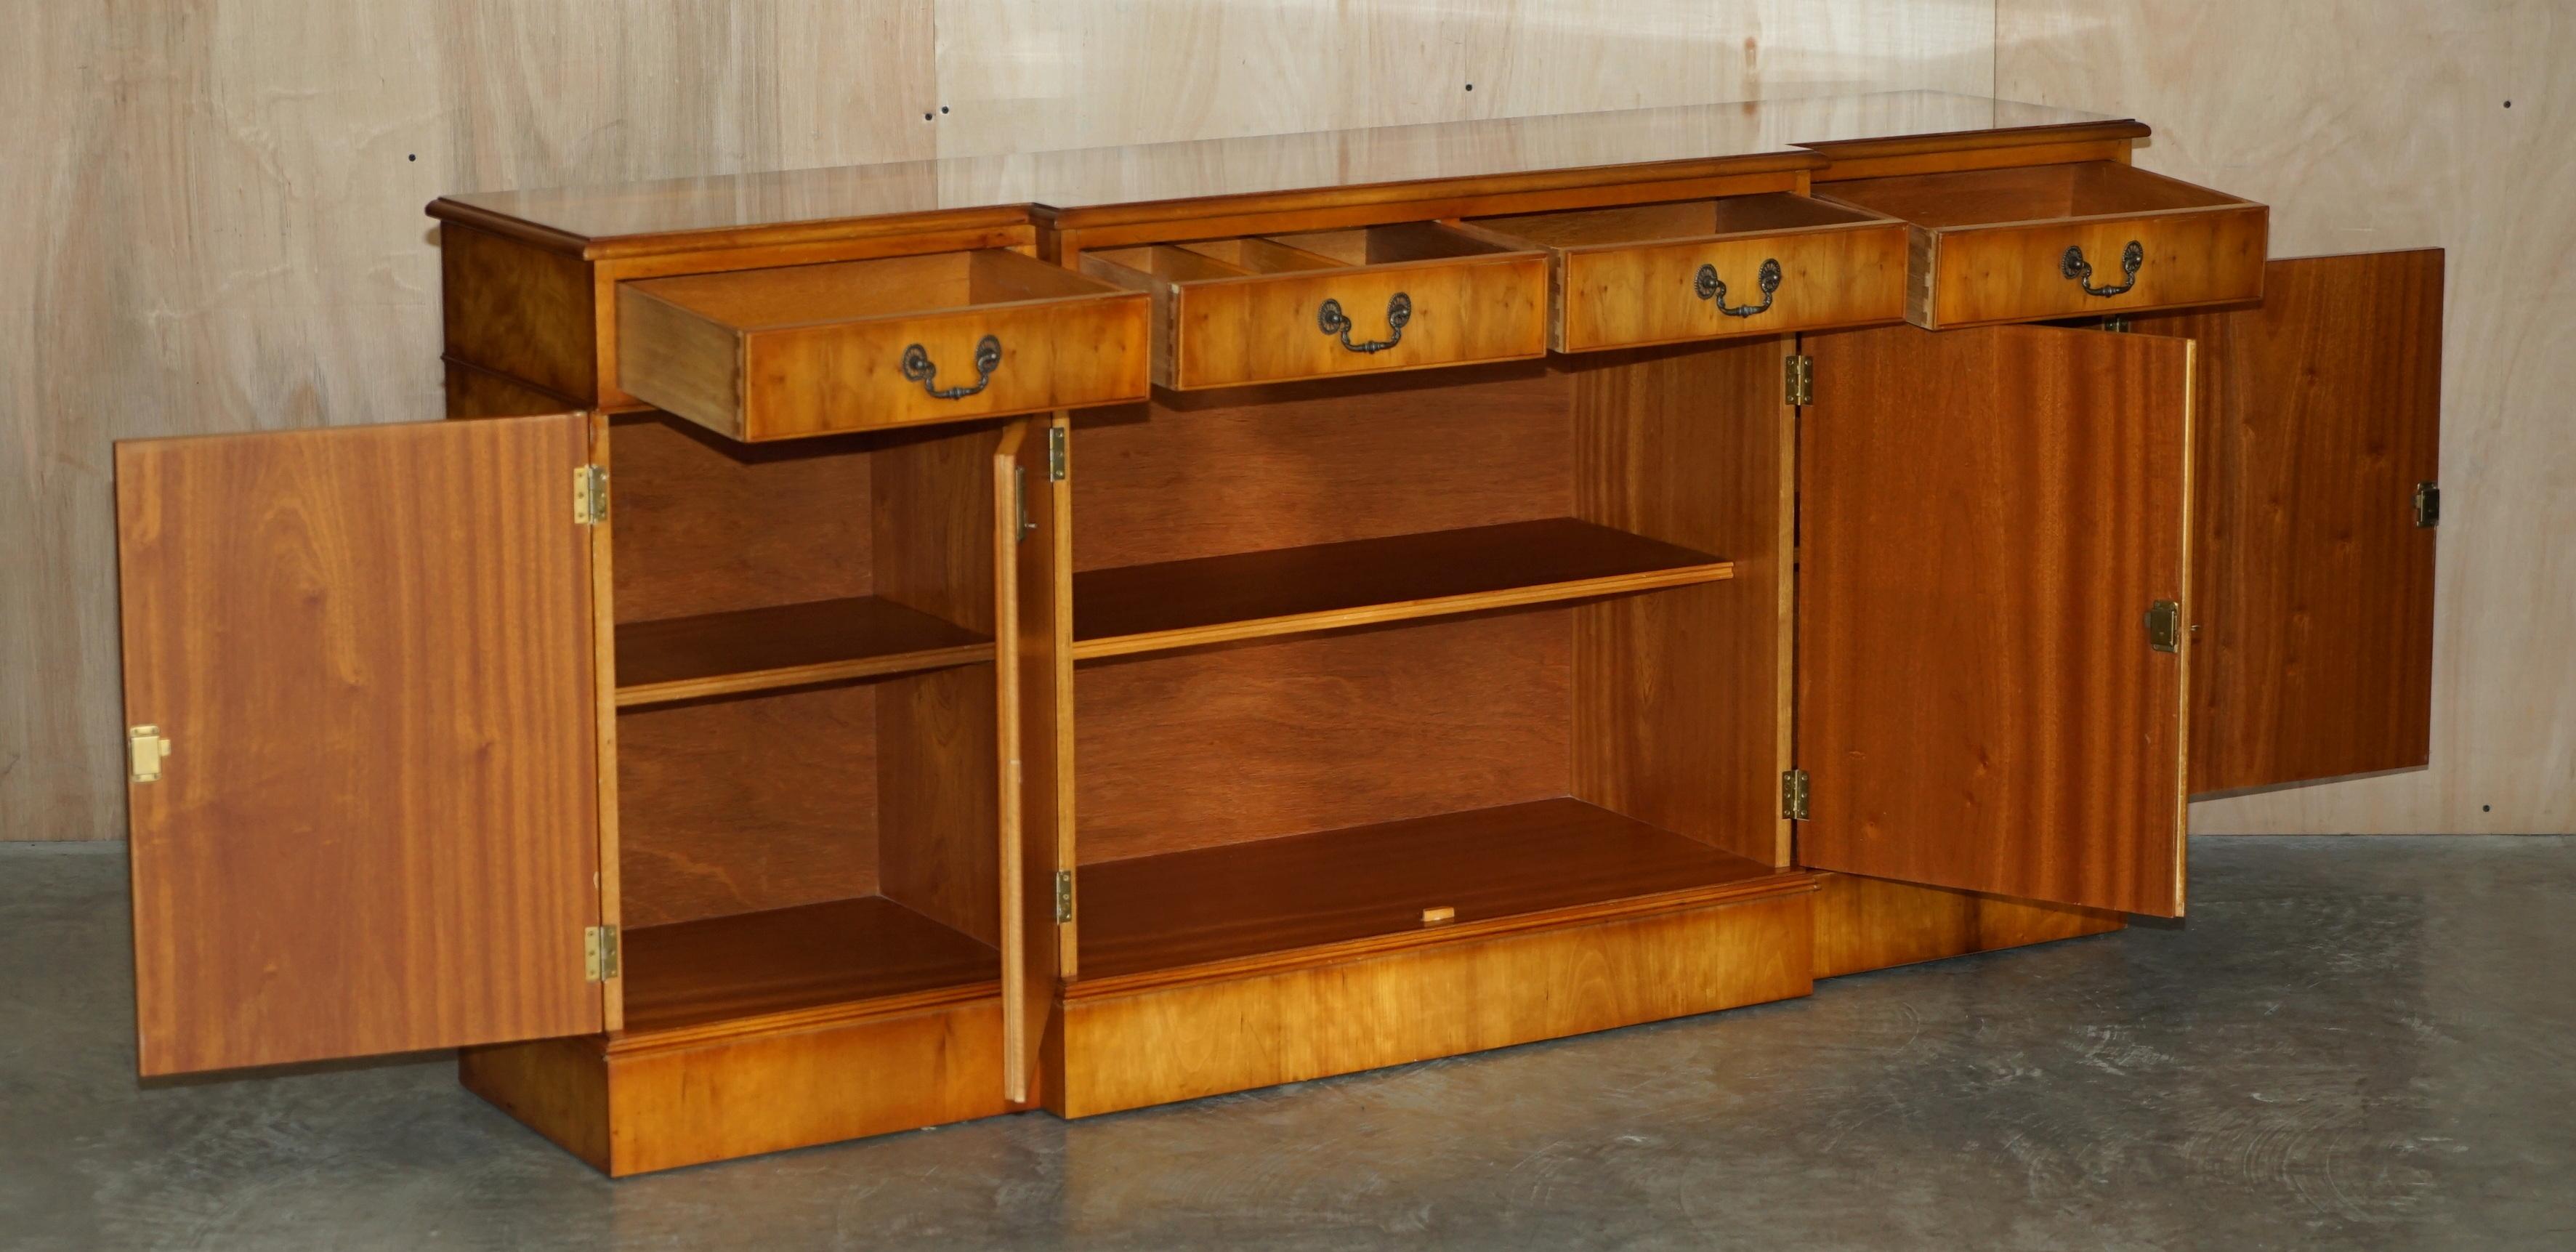 Vintage Burr Yew Wood Breakfront Sideboard with Four Drawers & Original Key For Sale 8